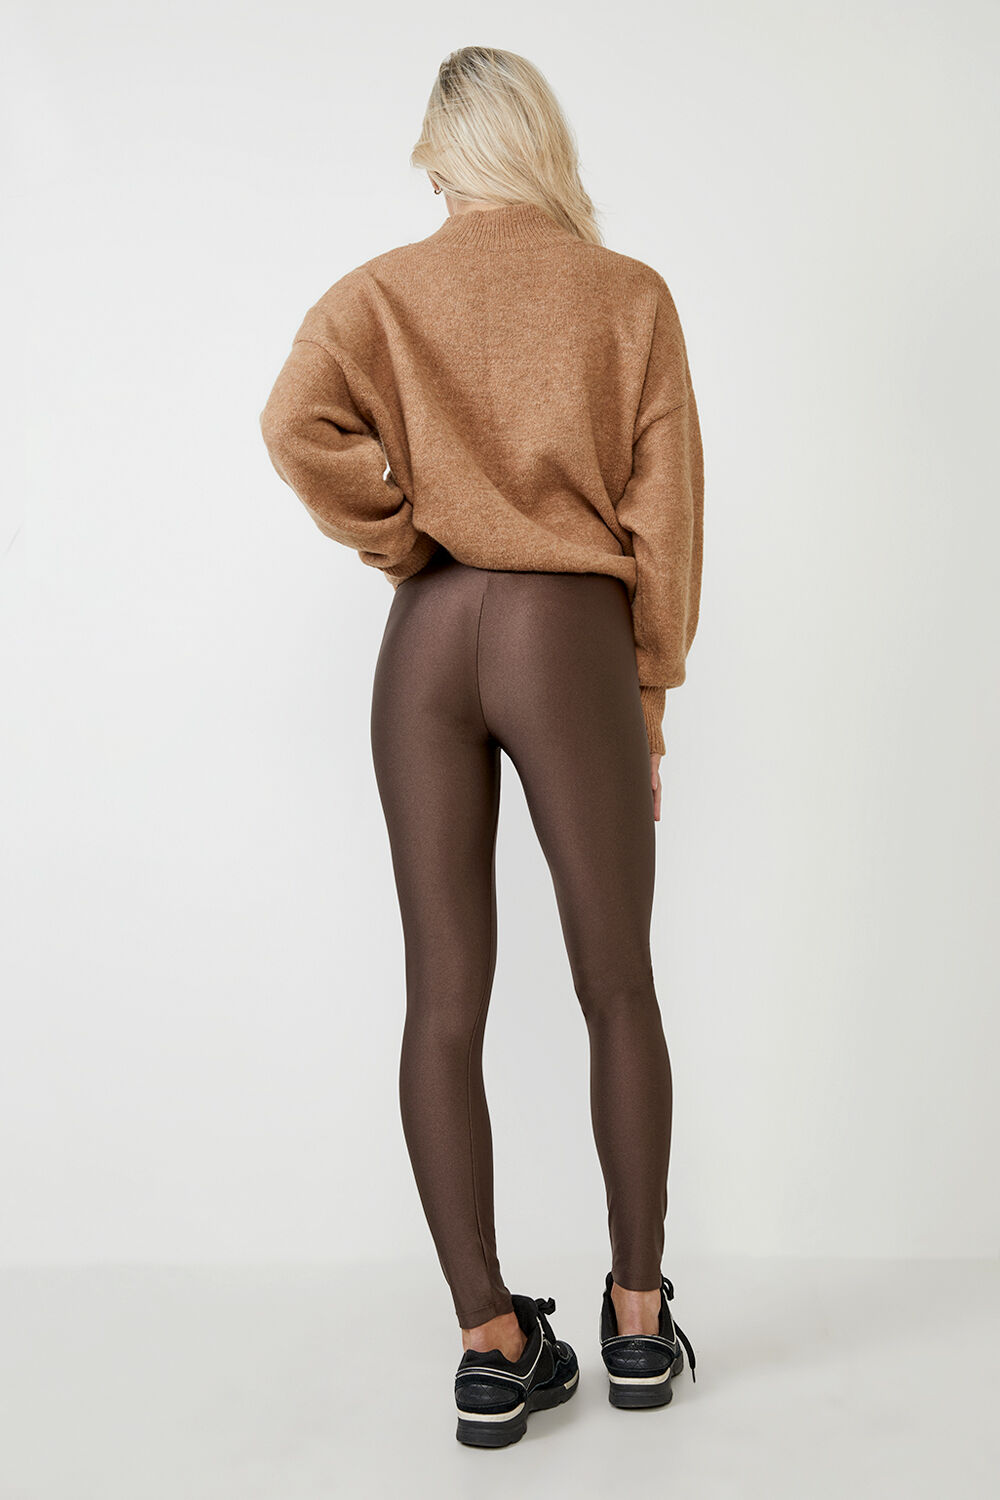 ROLLER LEGGING in colour CHOCOLATE BROWN